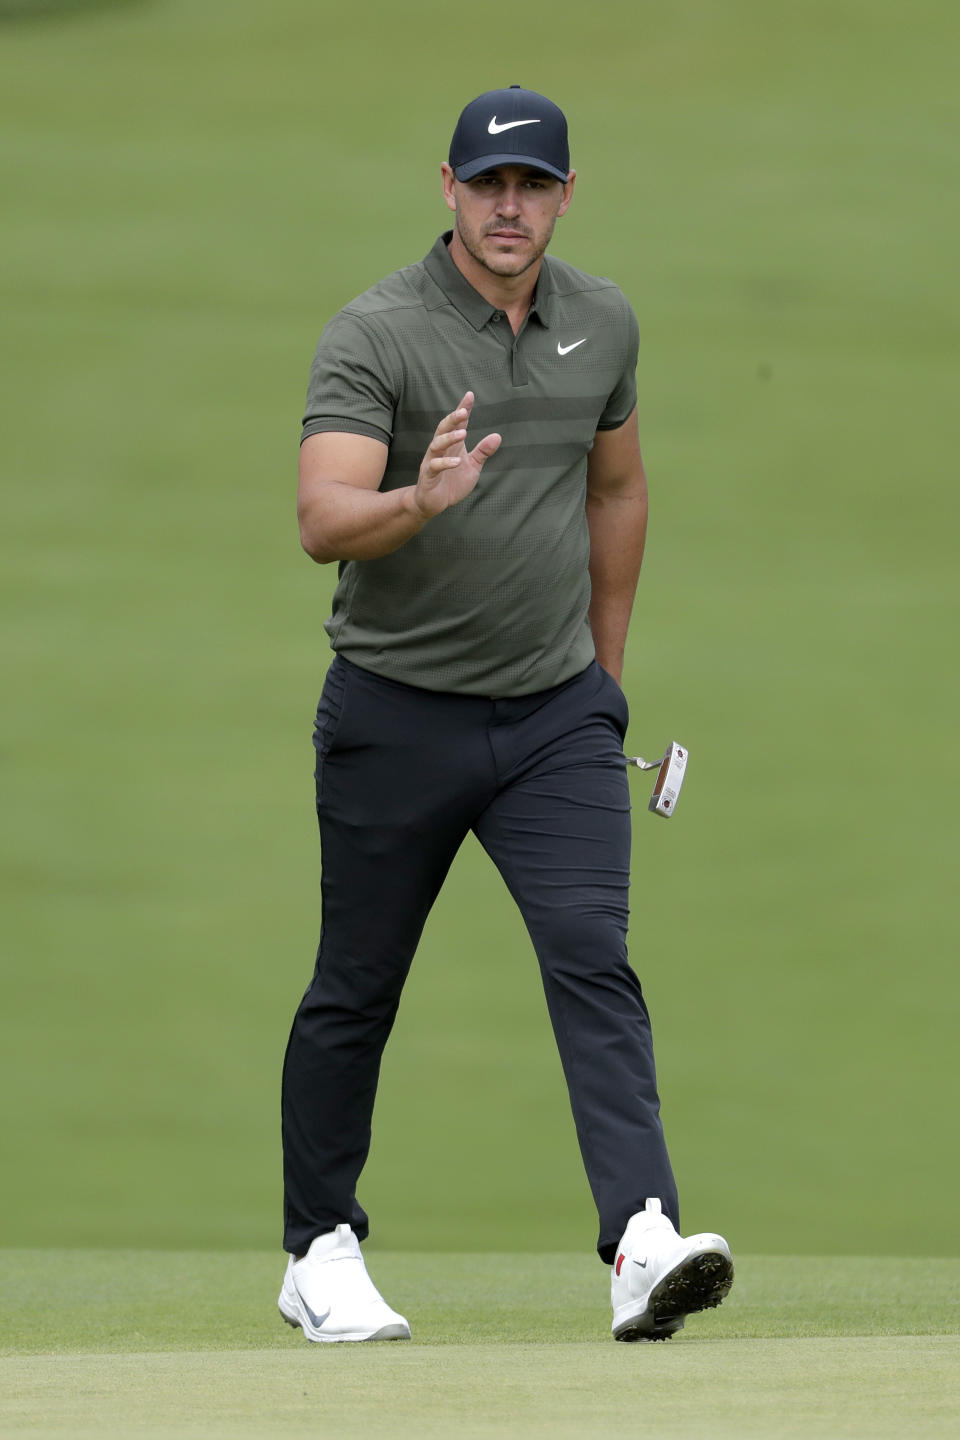 Brooks Koepka acknowledges the gallery after chipping on the 14th hole during the first round of the Northern Trust golf tournament, Thursday, Aug. 23, 2018, in Paramus, N.J. (AP Photo/Julio Cortez)